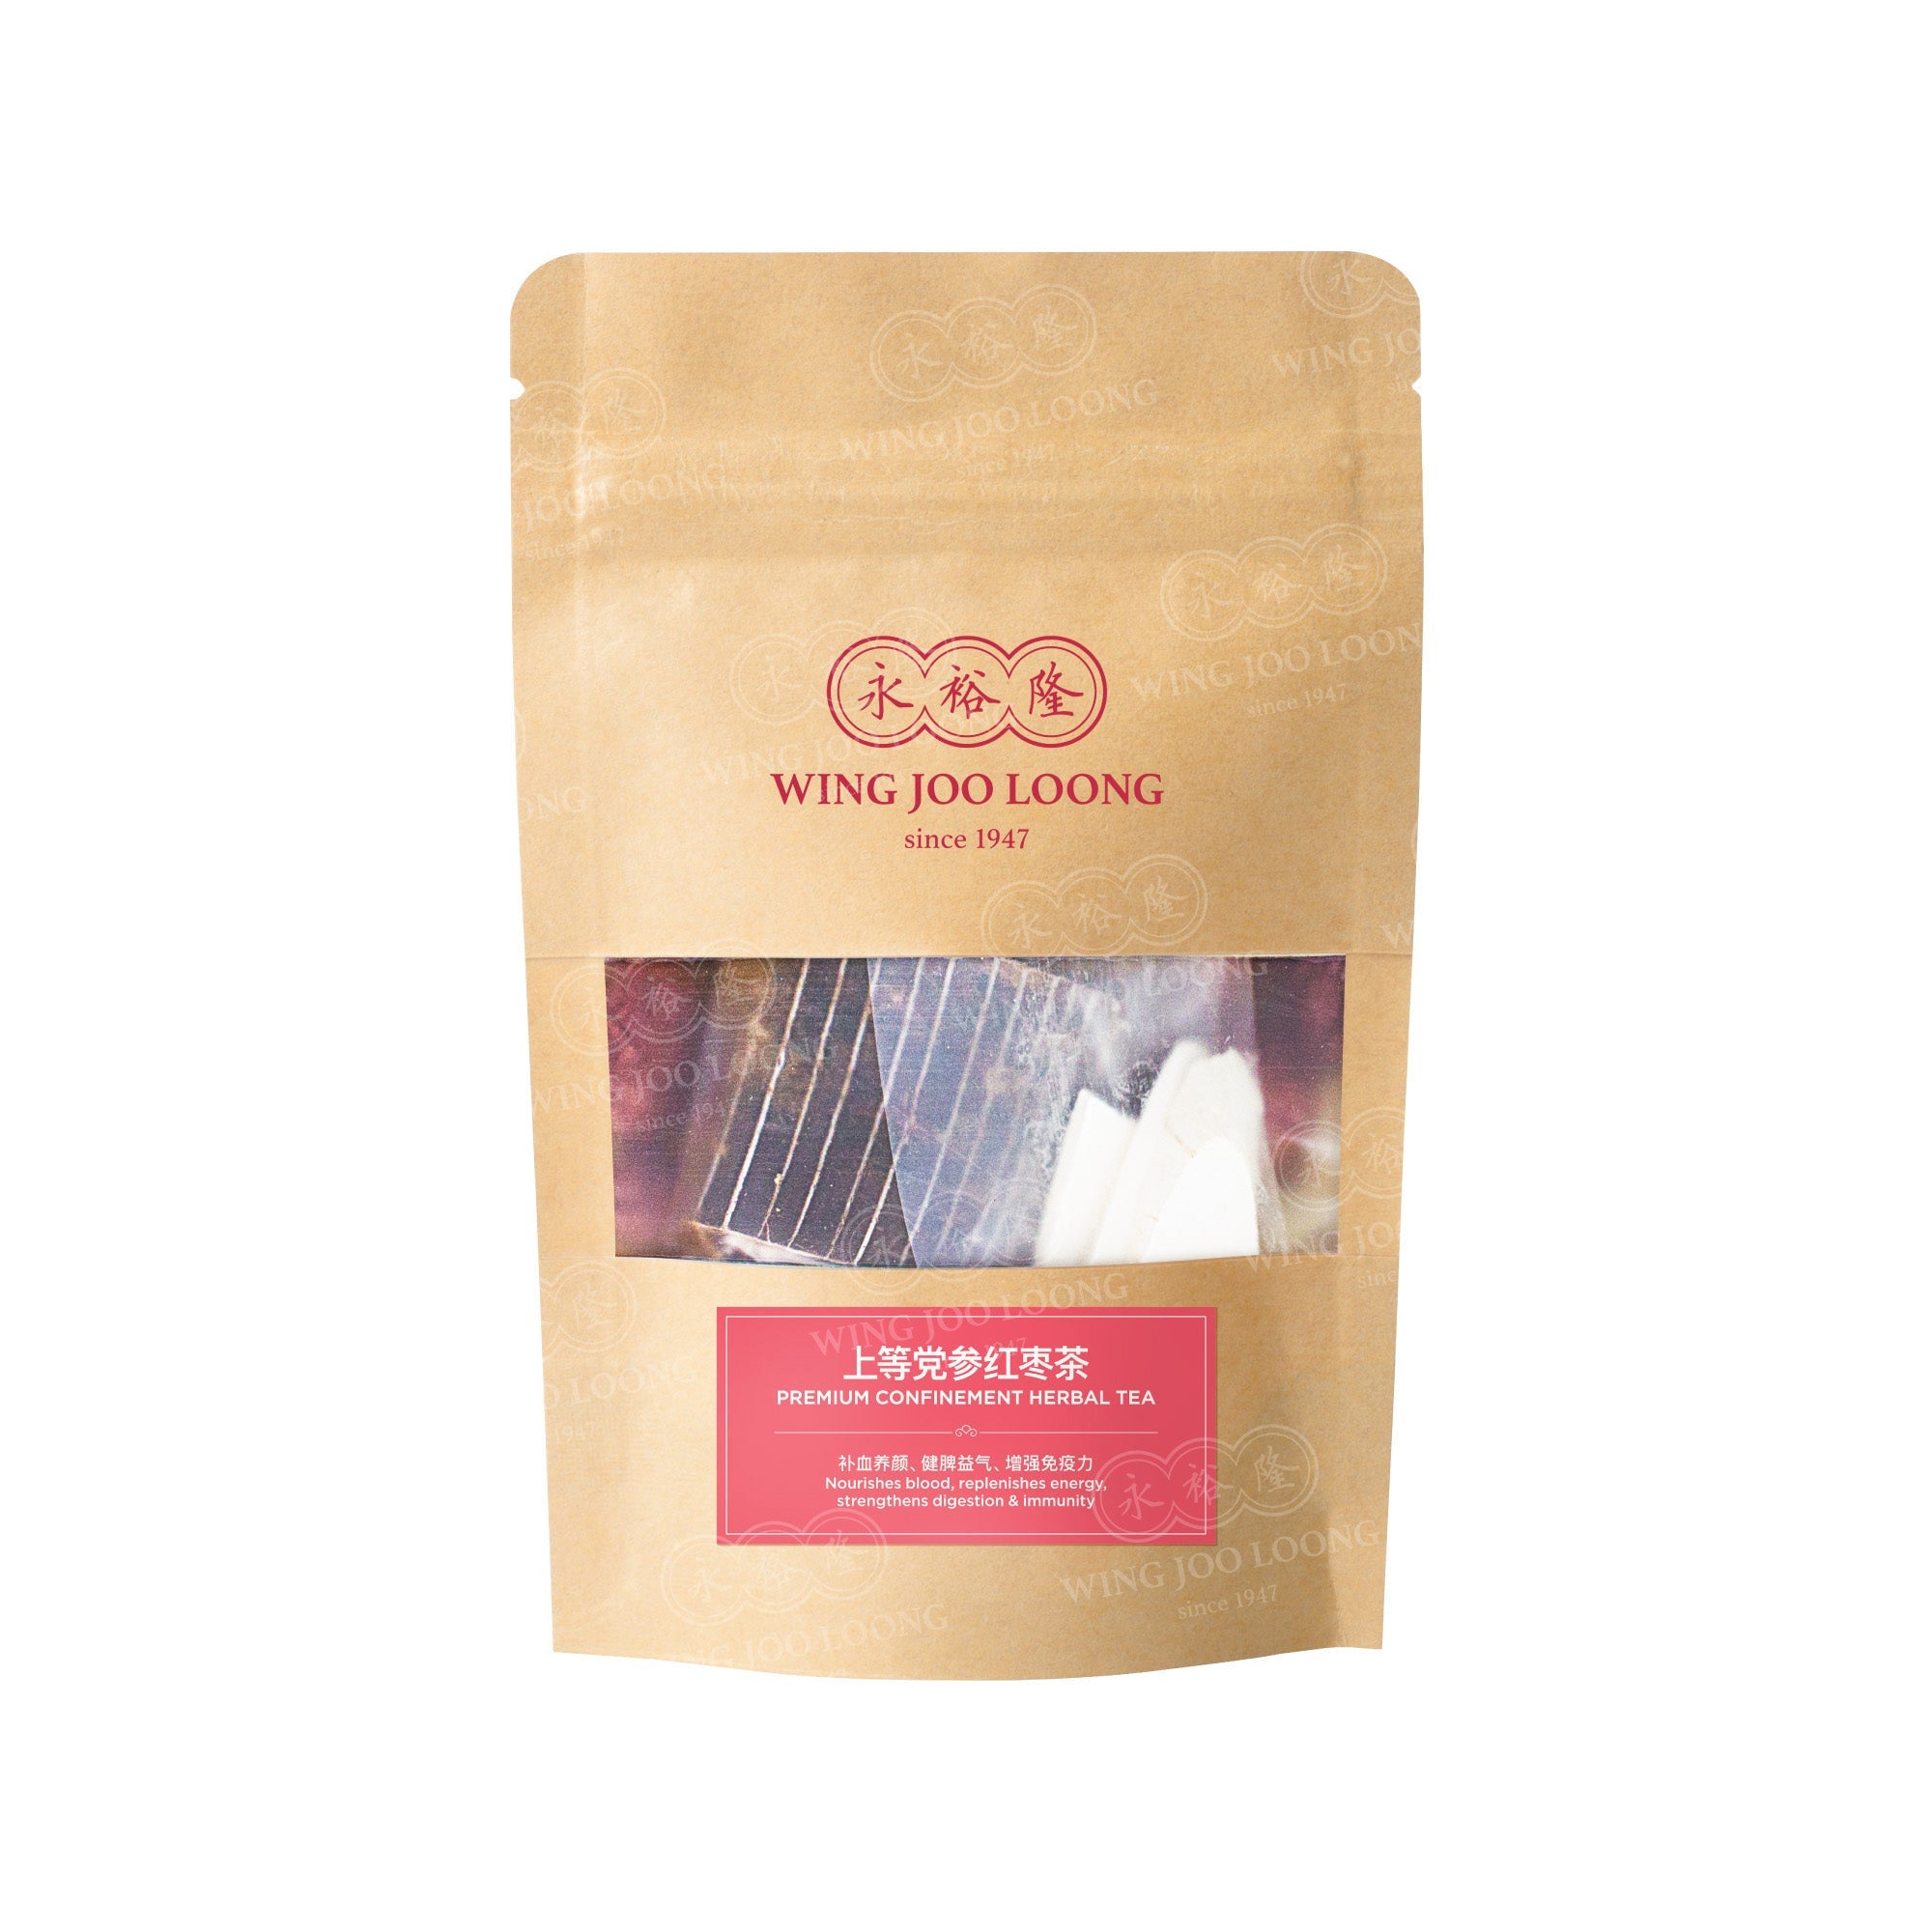 Wing Joo Loong Premium Confinement Red Date Tea Package (30 Days) 上等党参红枣茶